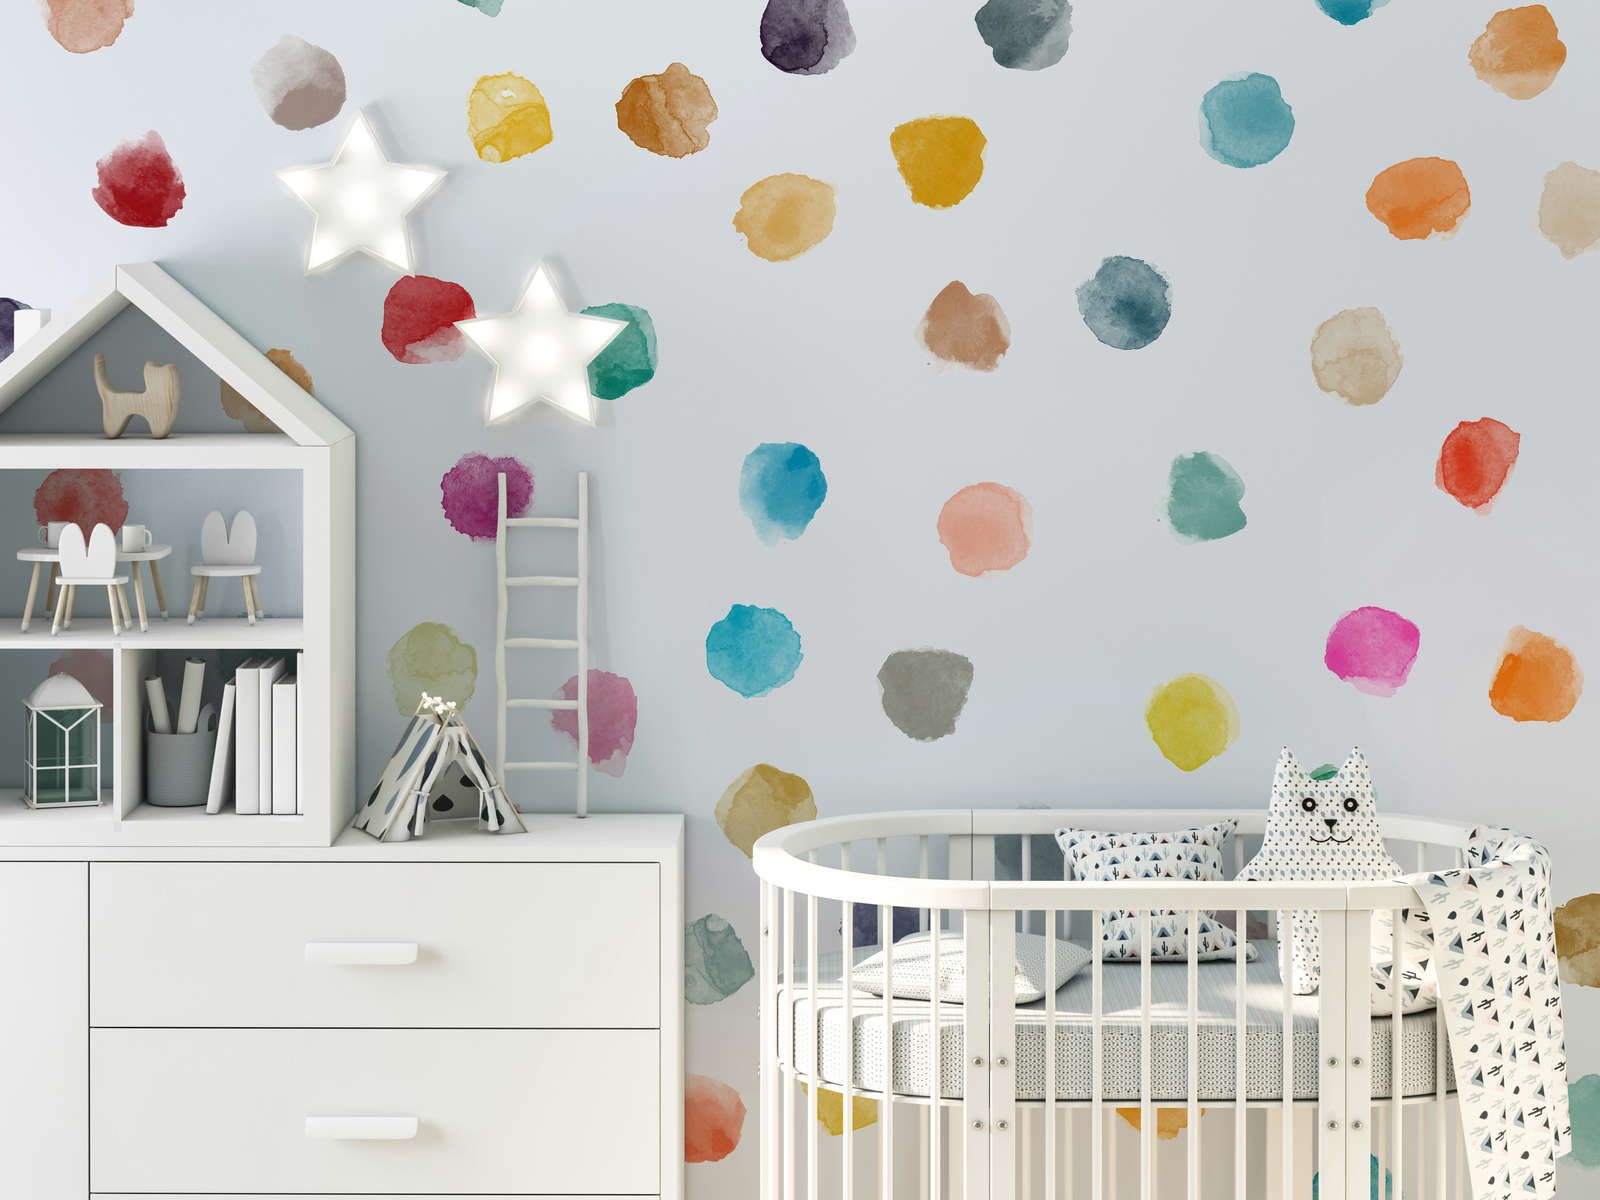             Nursery mural with colourful dots - Smooth & slightly shiny non-woven
        